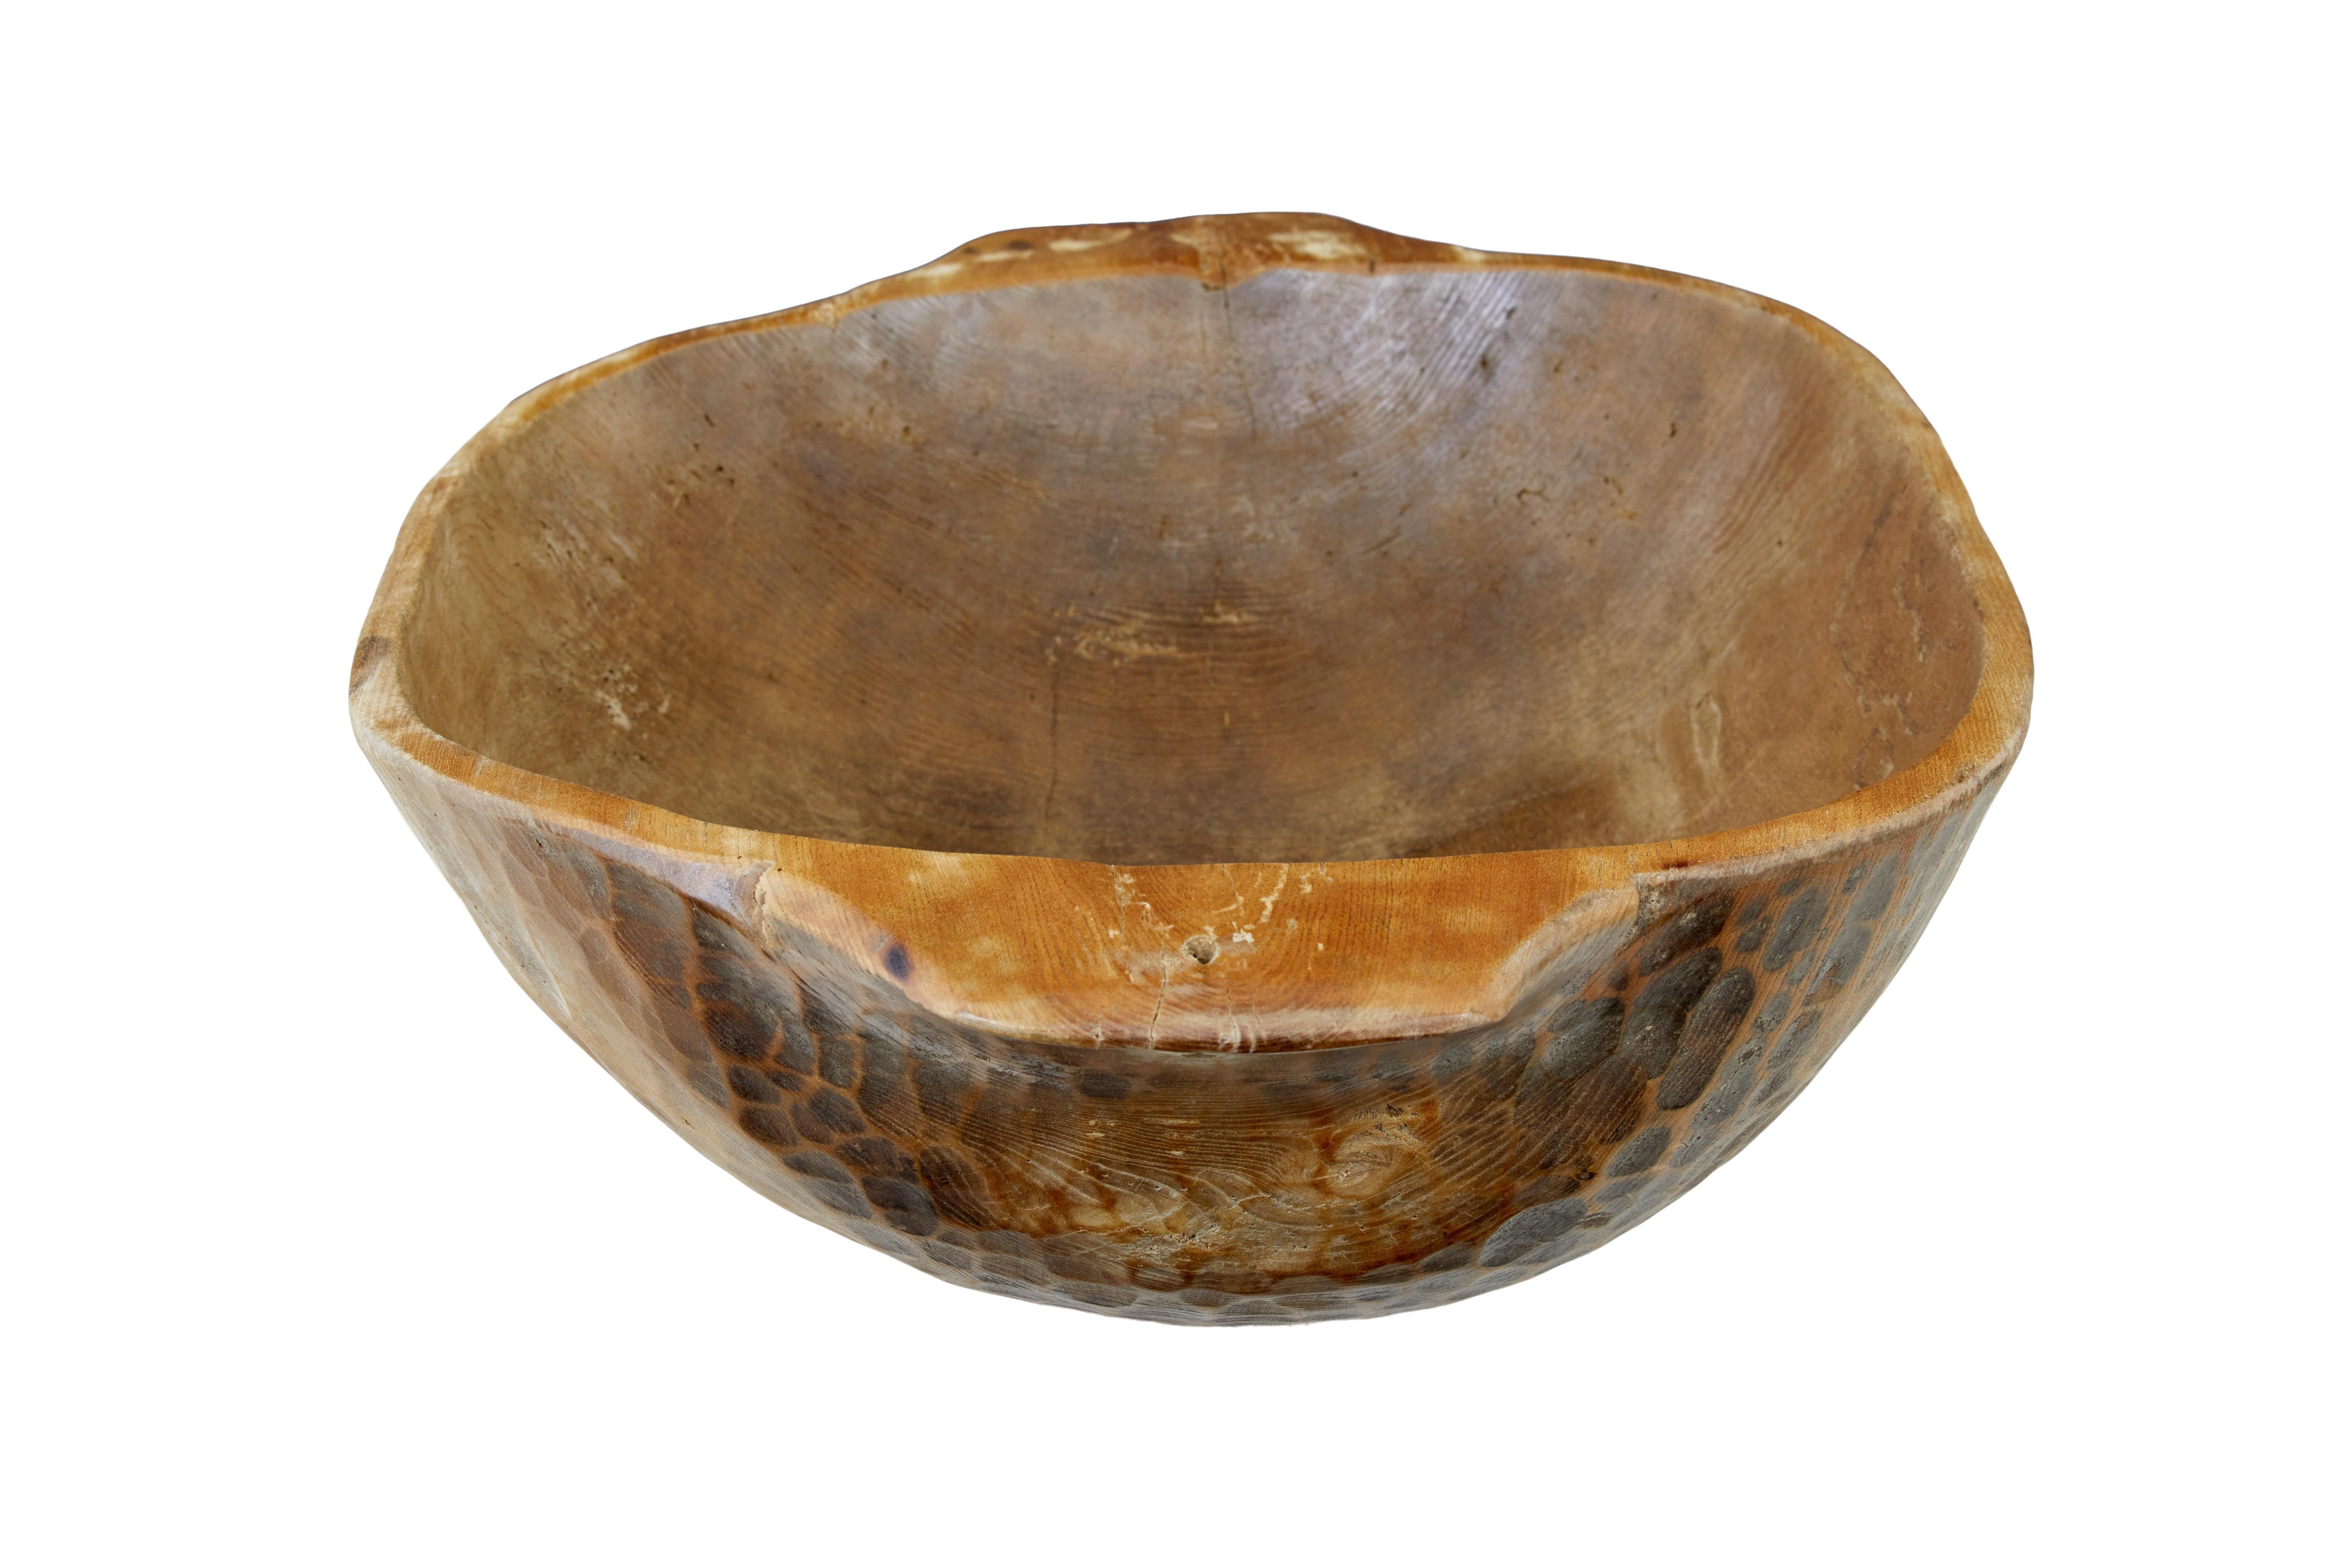 Large rustic dugout hand carved bowl circa 1900.

Hand made eastern european bowl.  These types of bowls were often used to feed livestock.  Made from a solid tree trunk section and hollowed out using an adzed technique.

This bowl is presented